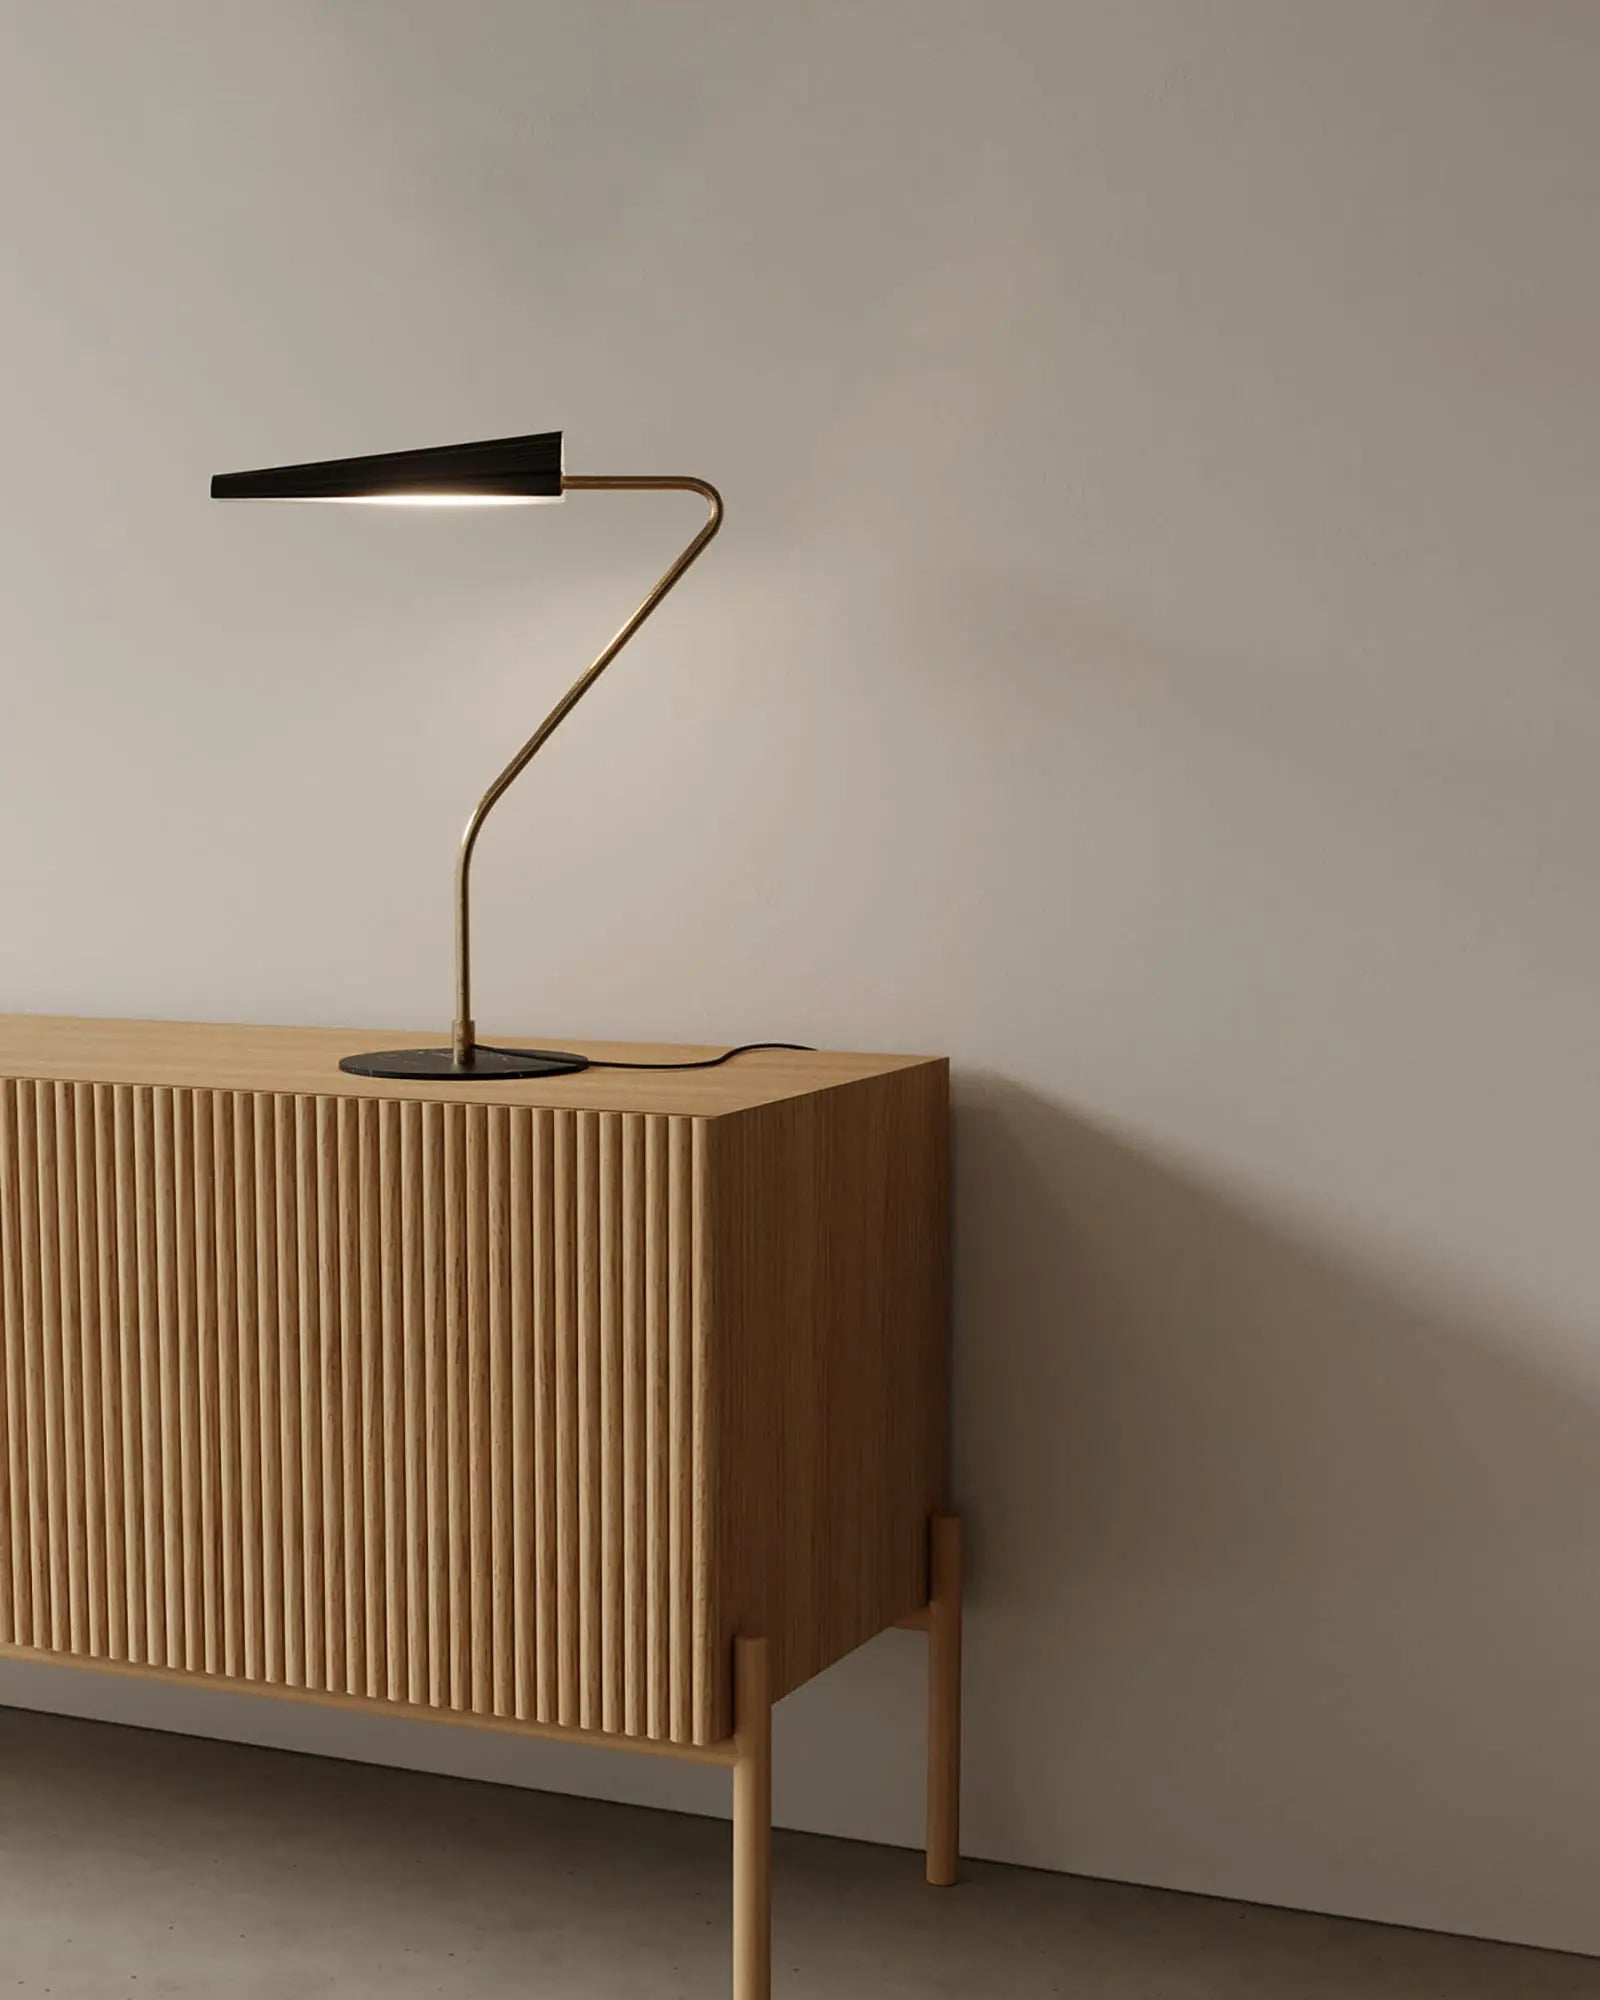 Bion contemporary table lamp on wooden cabinet